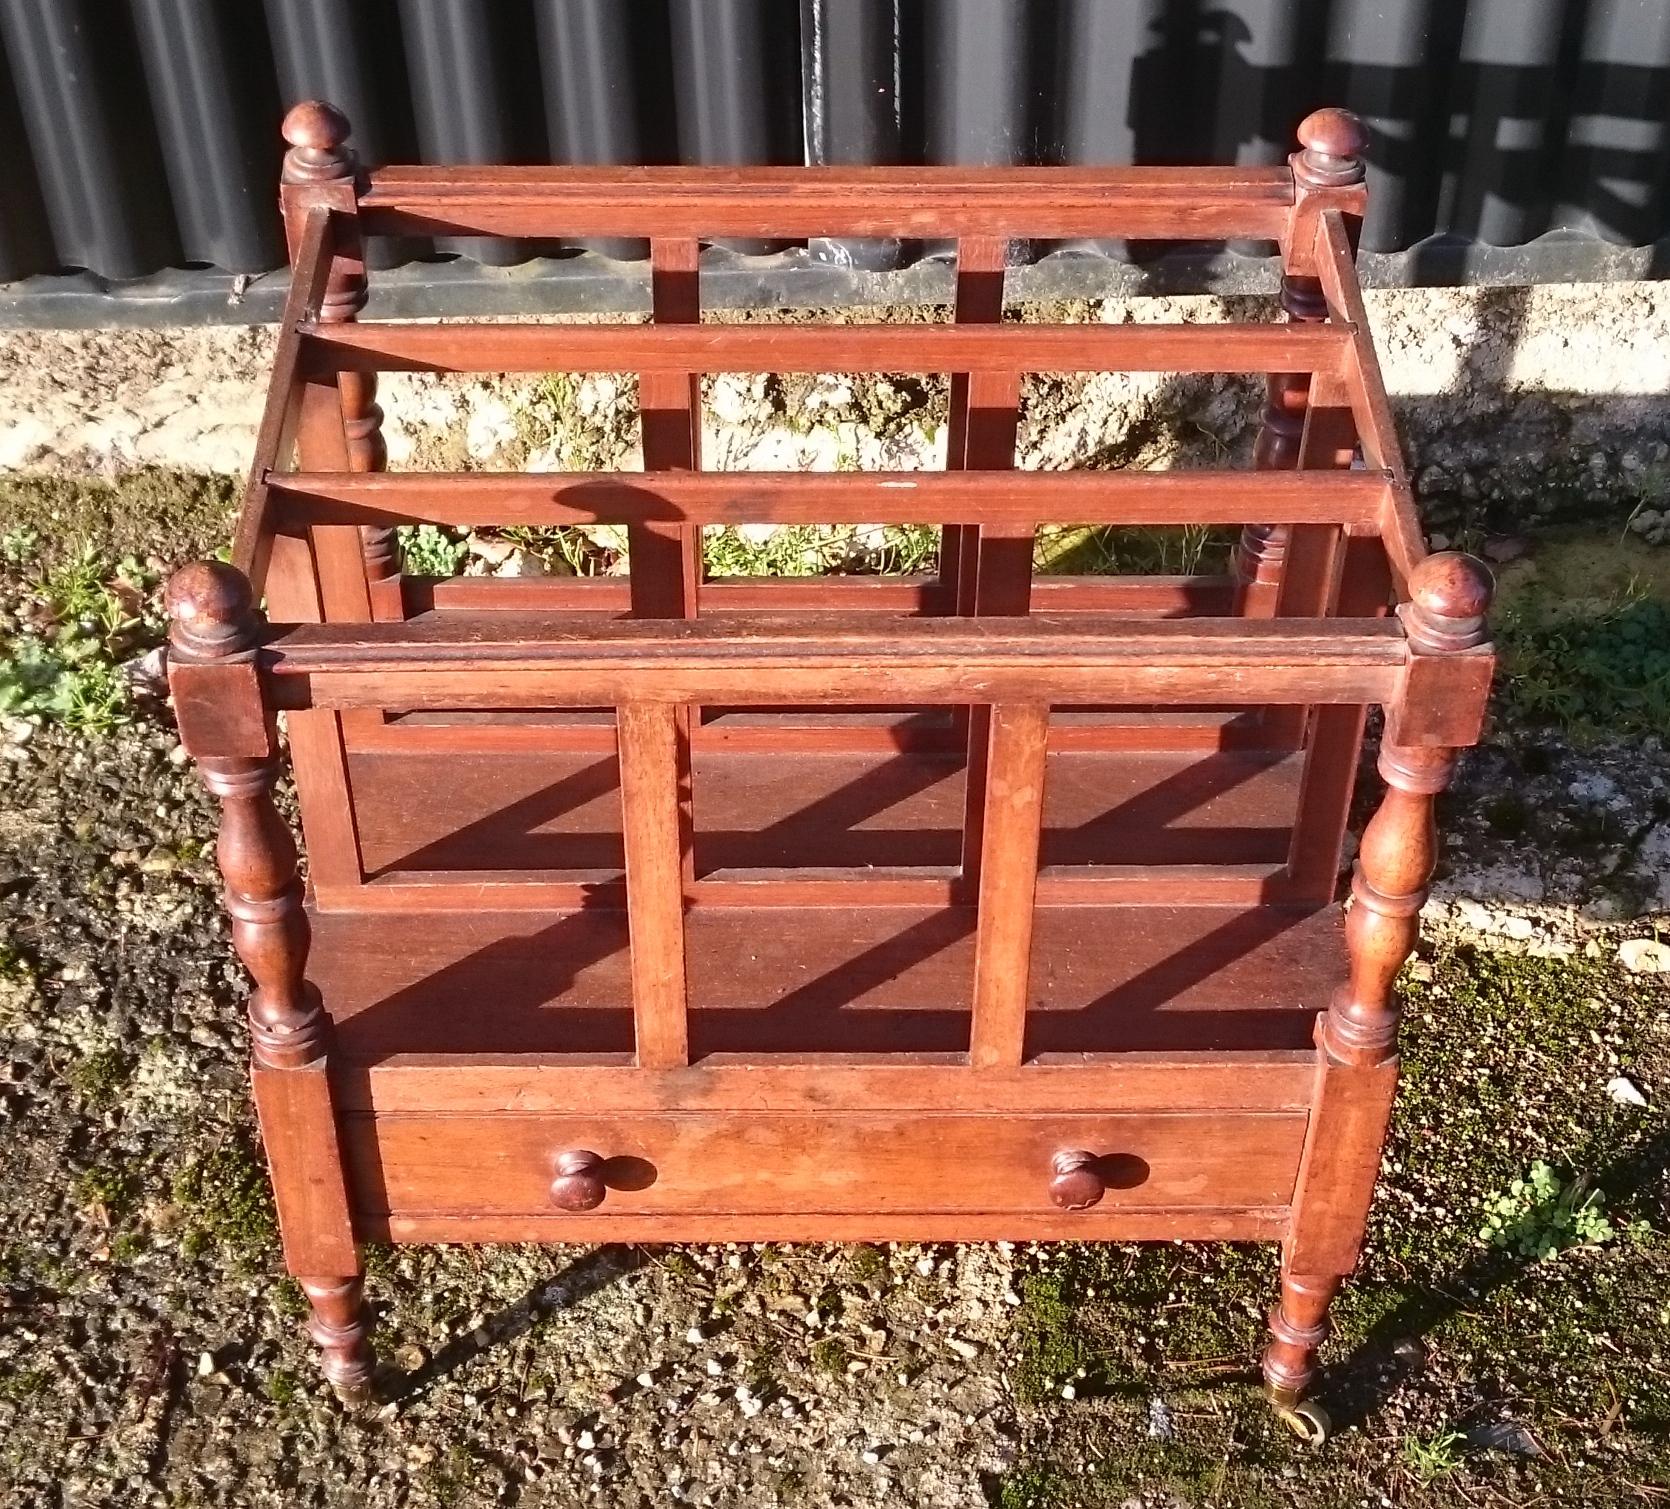 Very fine quality 1920s mahogany Canterbury made by Howard and Sons. This magazine rack is very well made with mahogany lined drawers and precision dovetails. The turned detail to the legs, spindles and handles is very fine and the casters are very